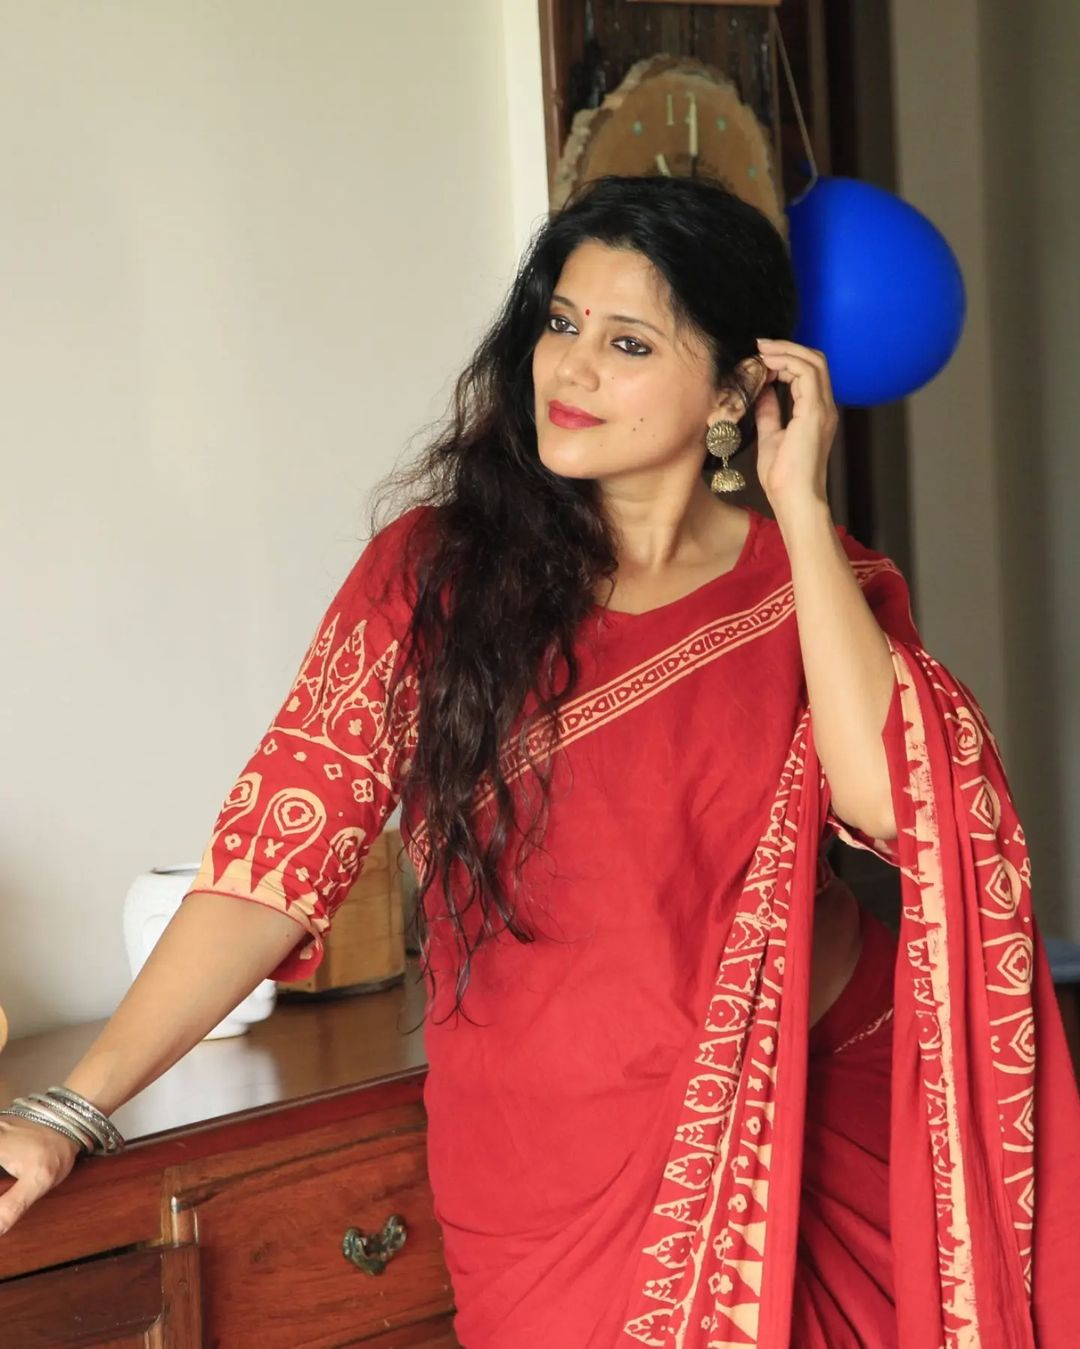 Pushpa Impossible Fame Actress Karuna Pandey On Juggling Between The Two Shows And She Said She Needs Sleep